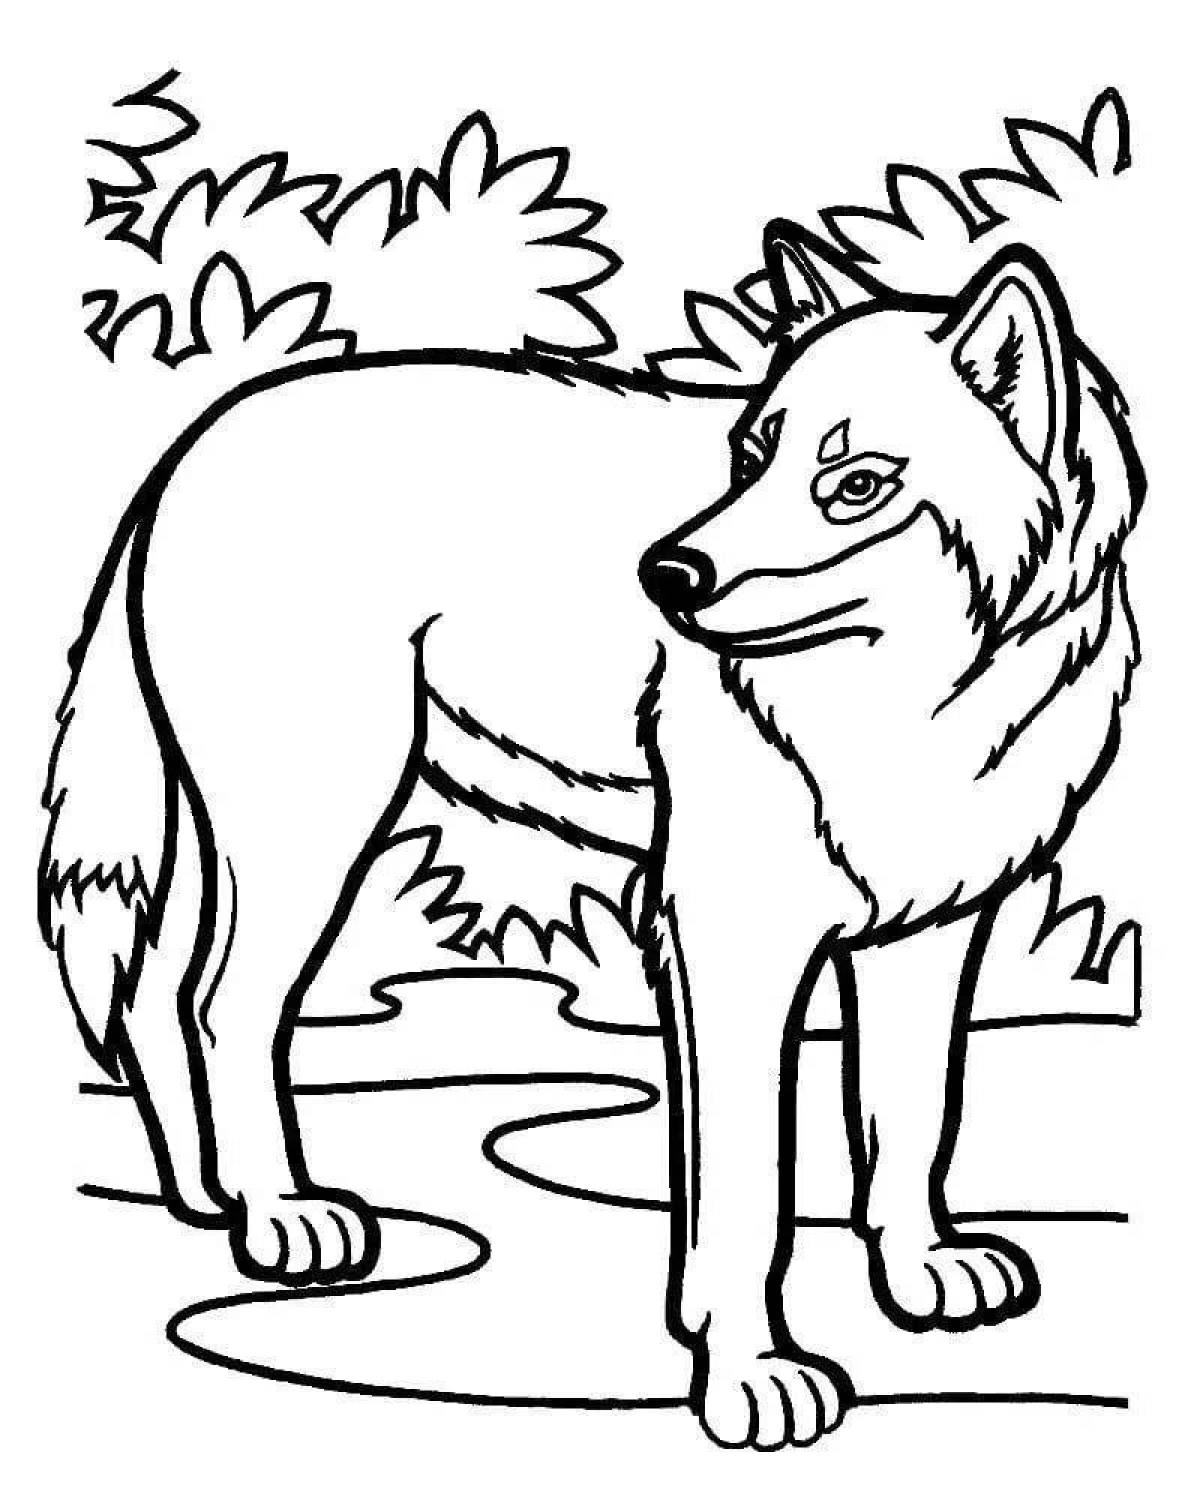 Fancy wolf coloring book for kids 6-7 years old